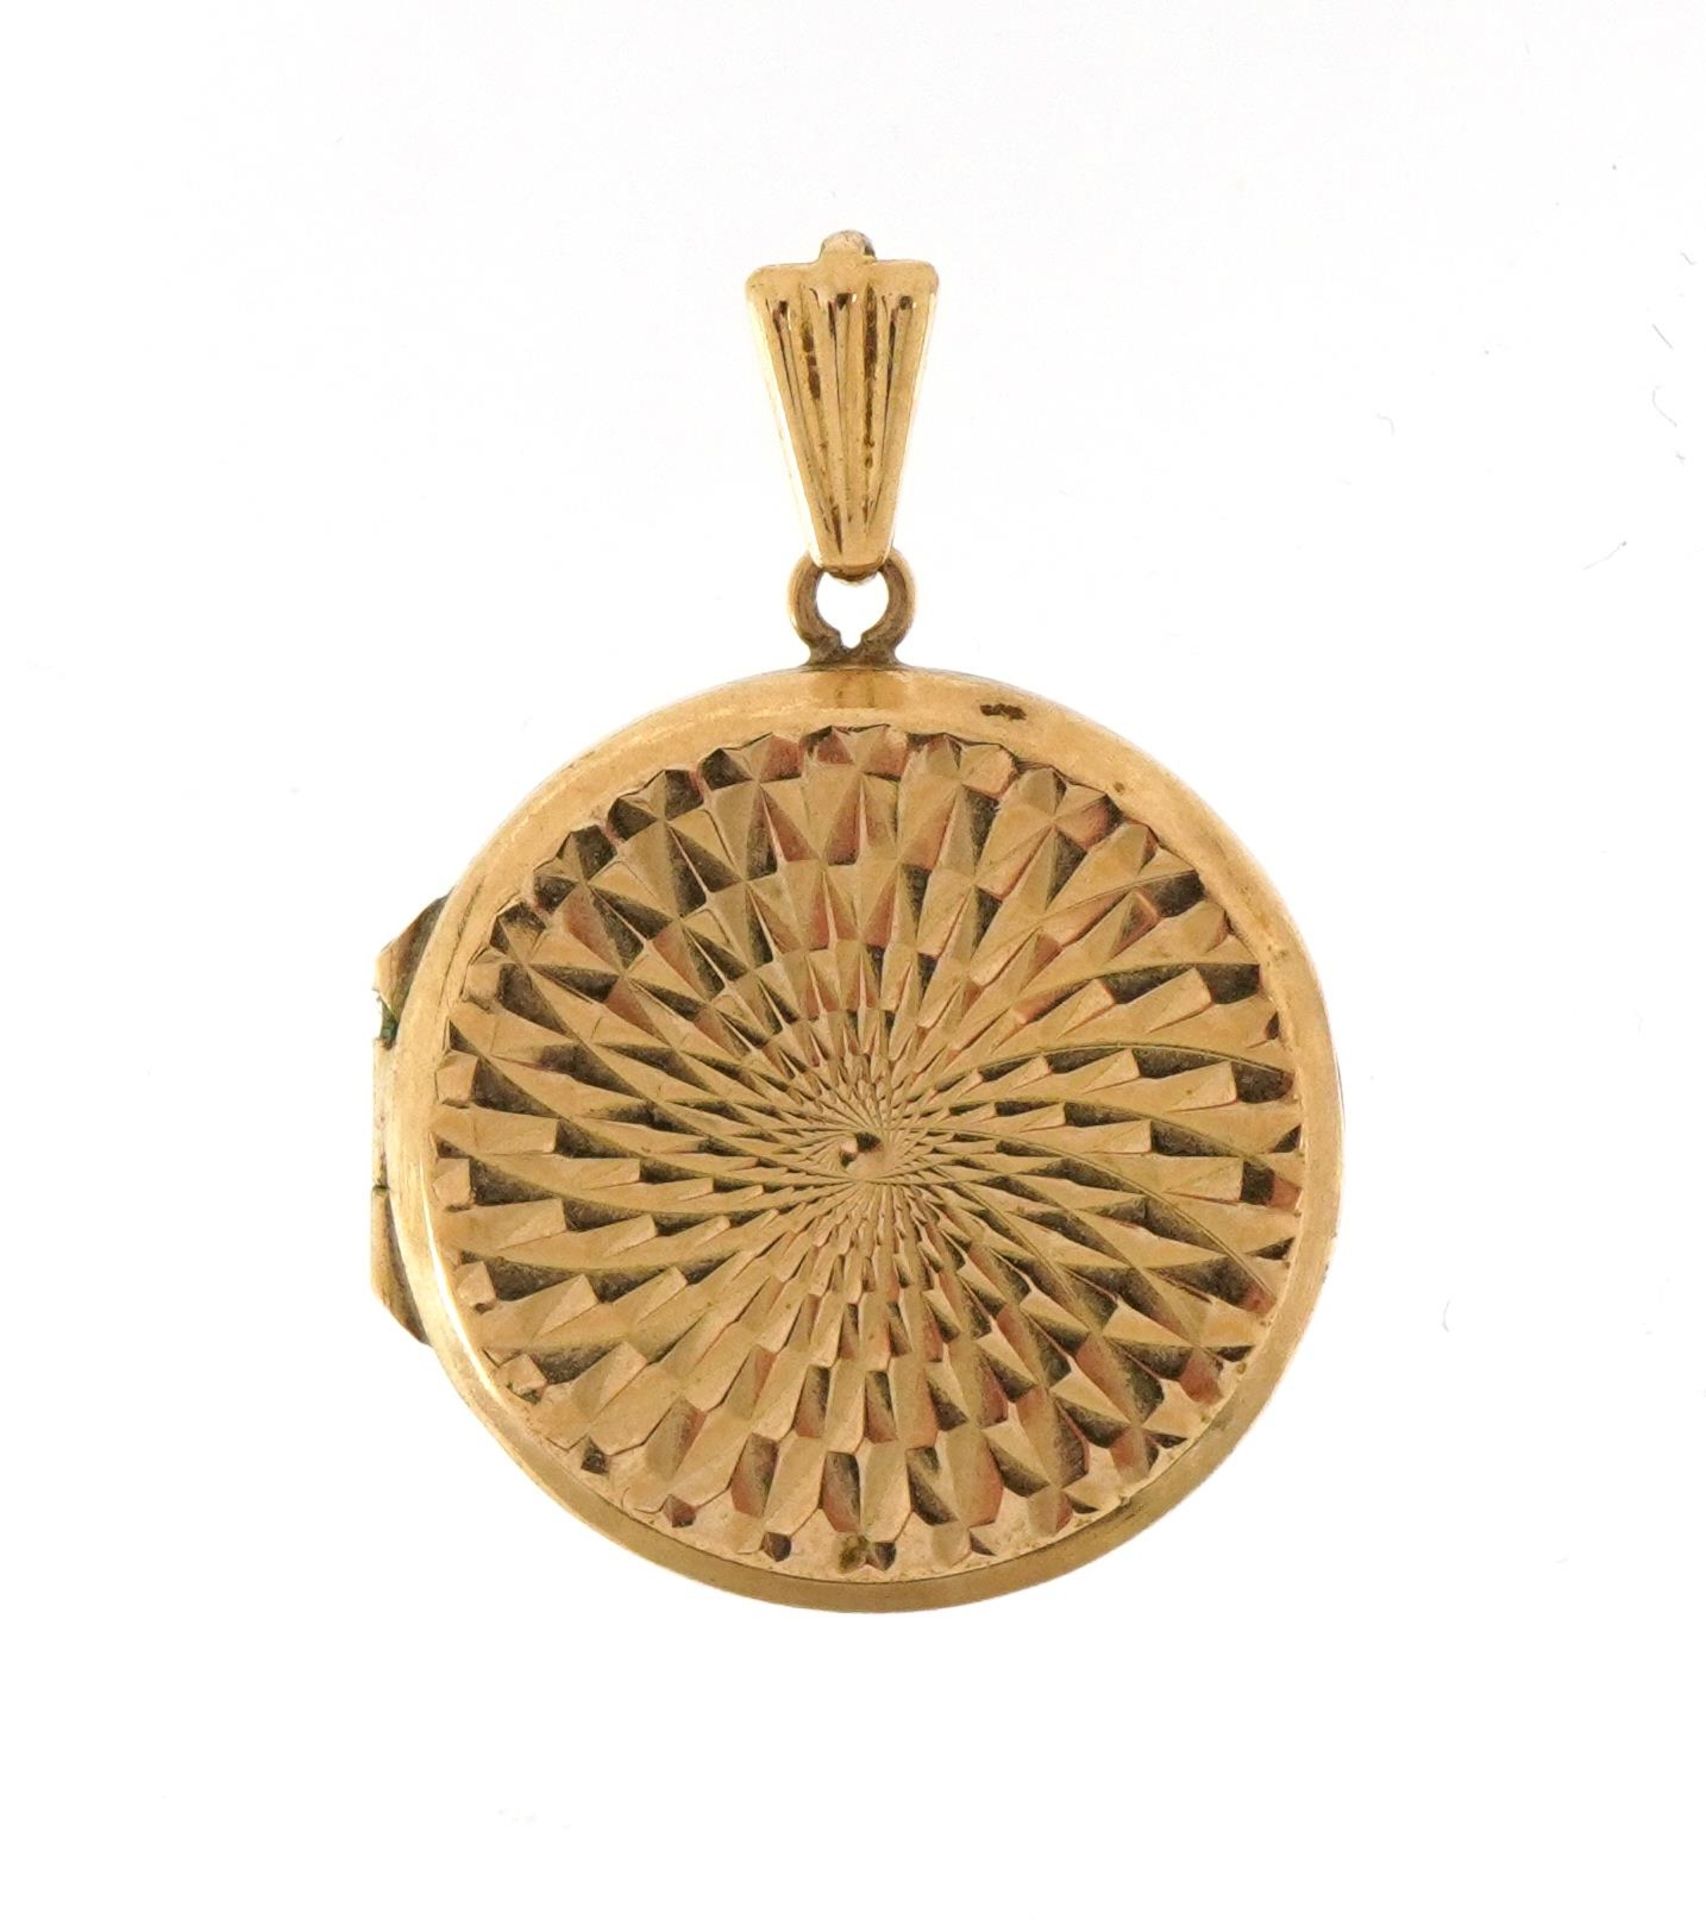 9ct gold circular locket with engine turned decoration, 2.9cm high, 3.7g